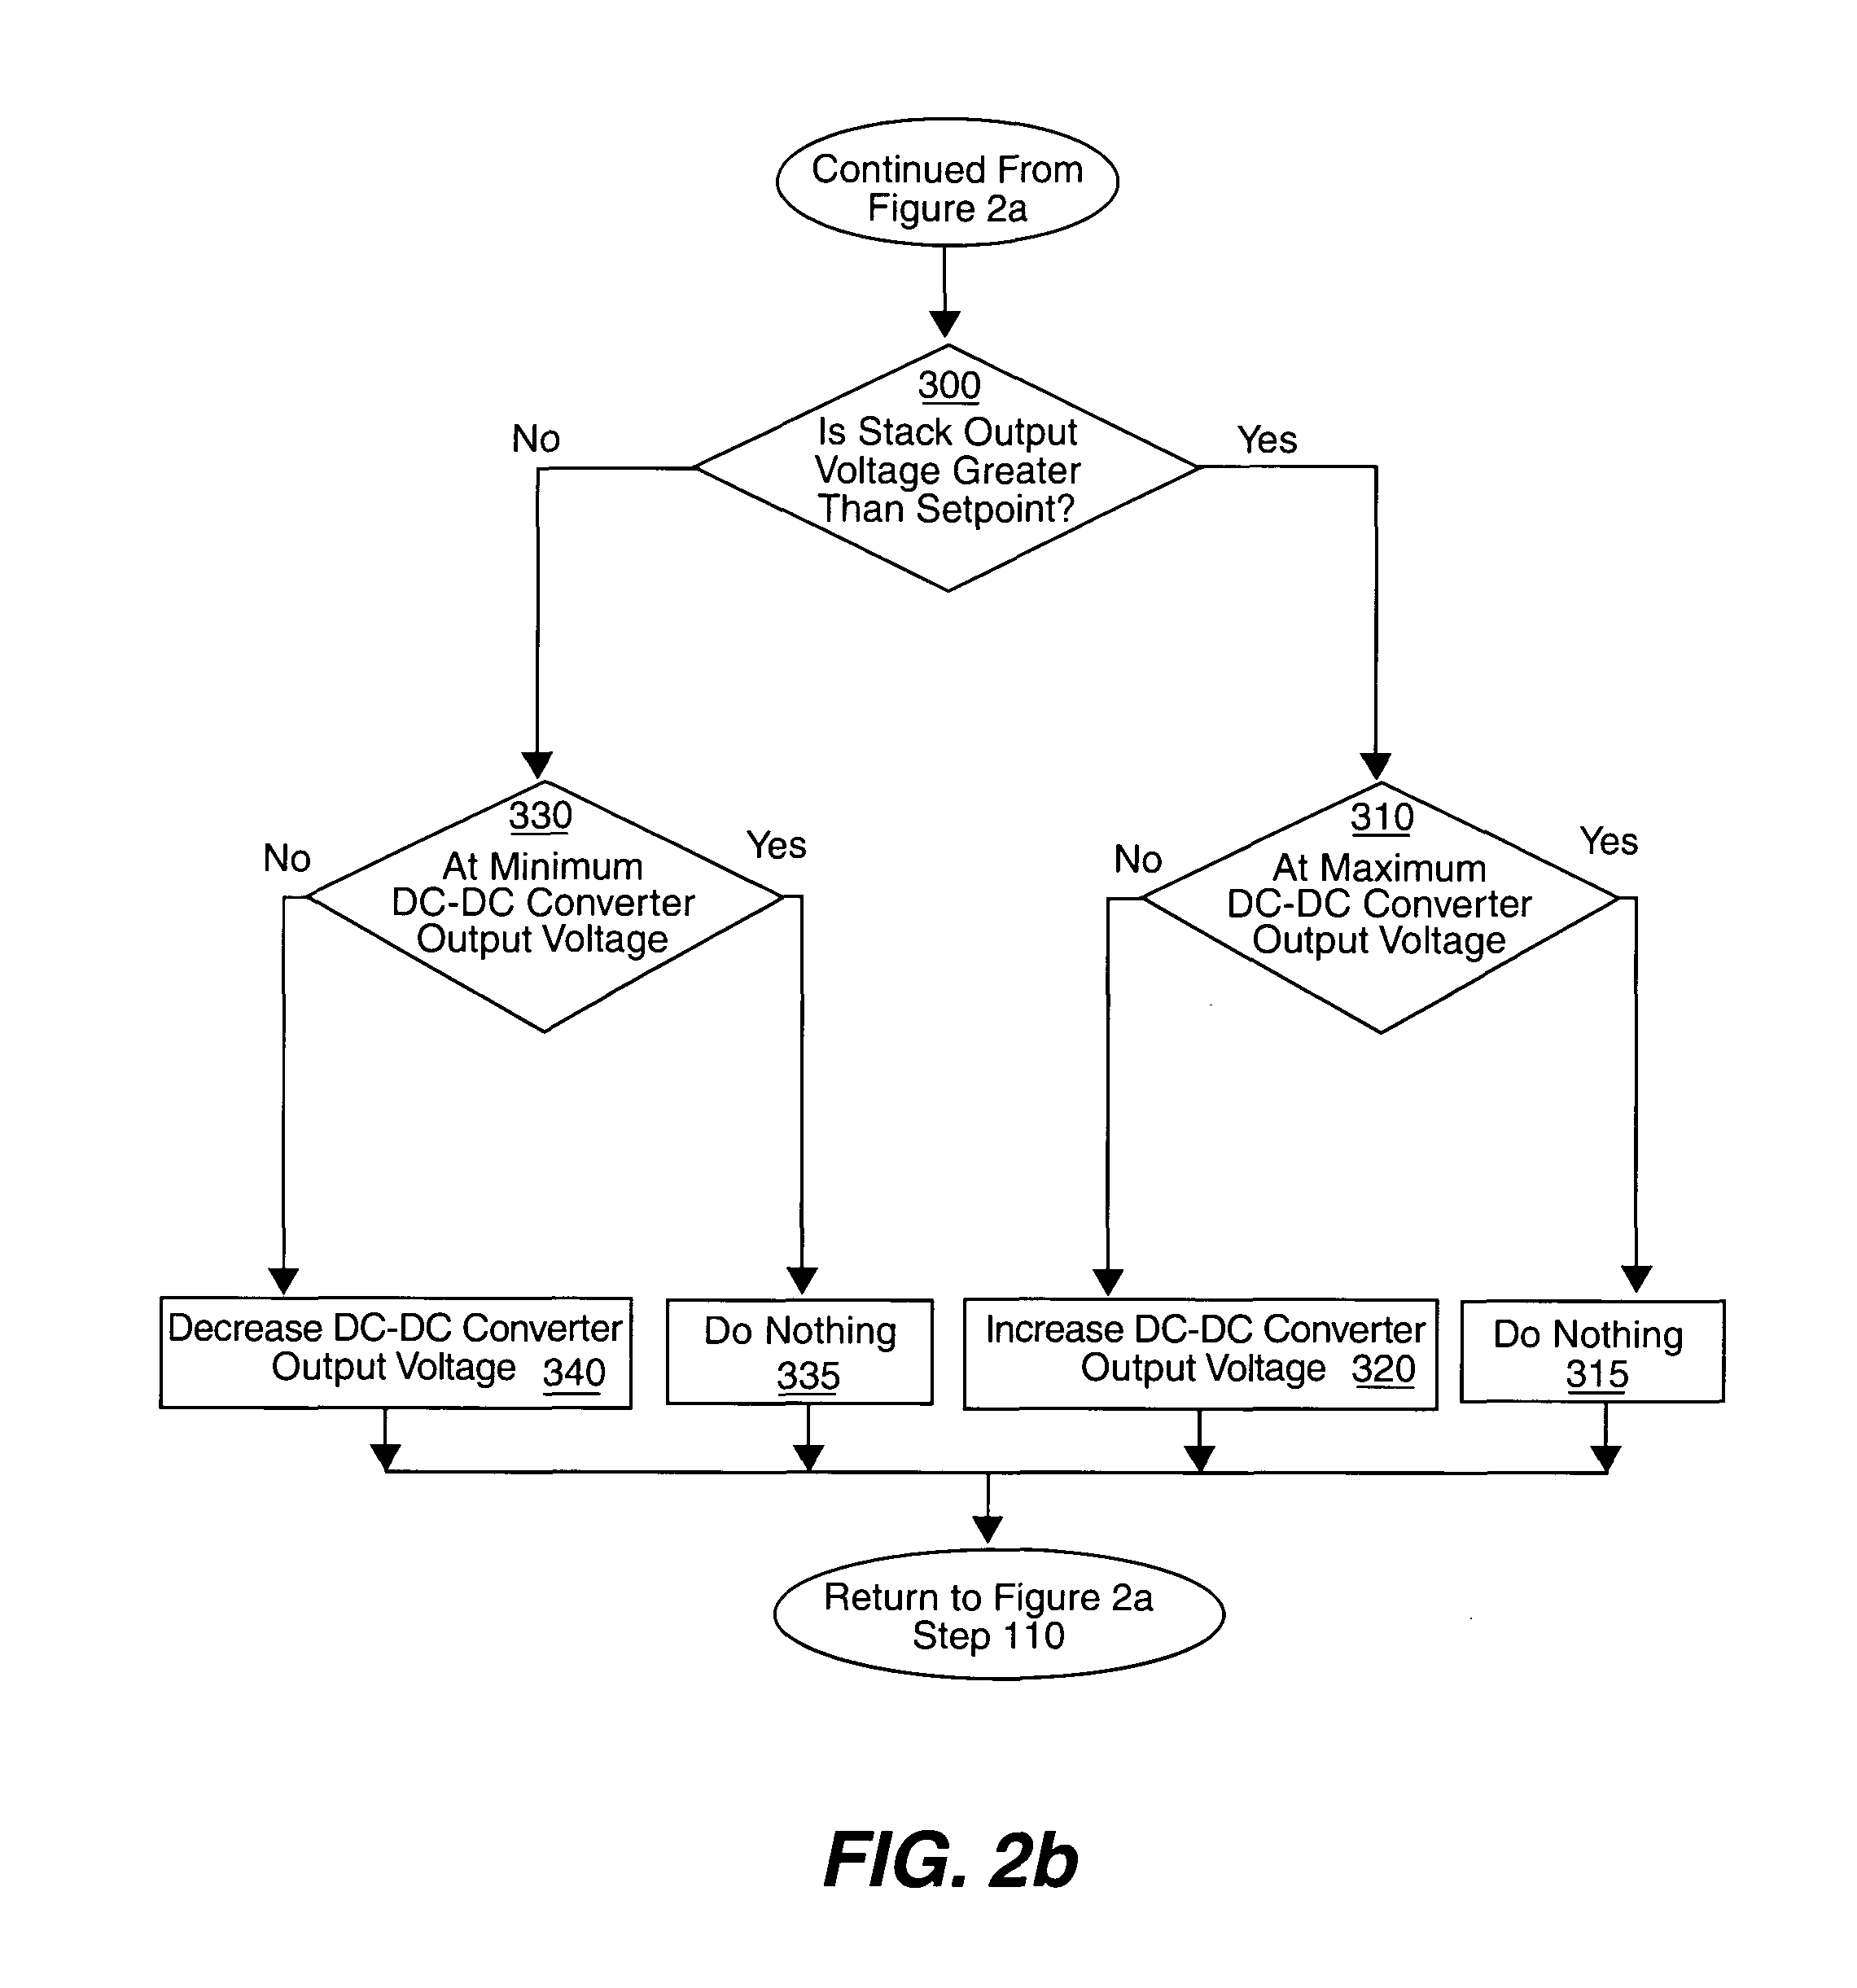 Apparatus and method for regulating hybrid fuel cell power system output